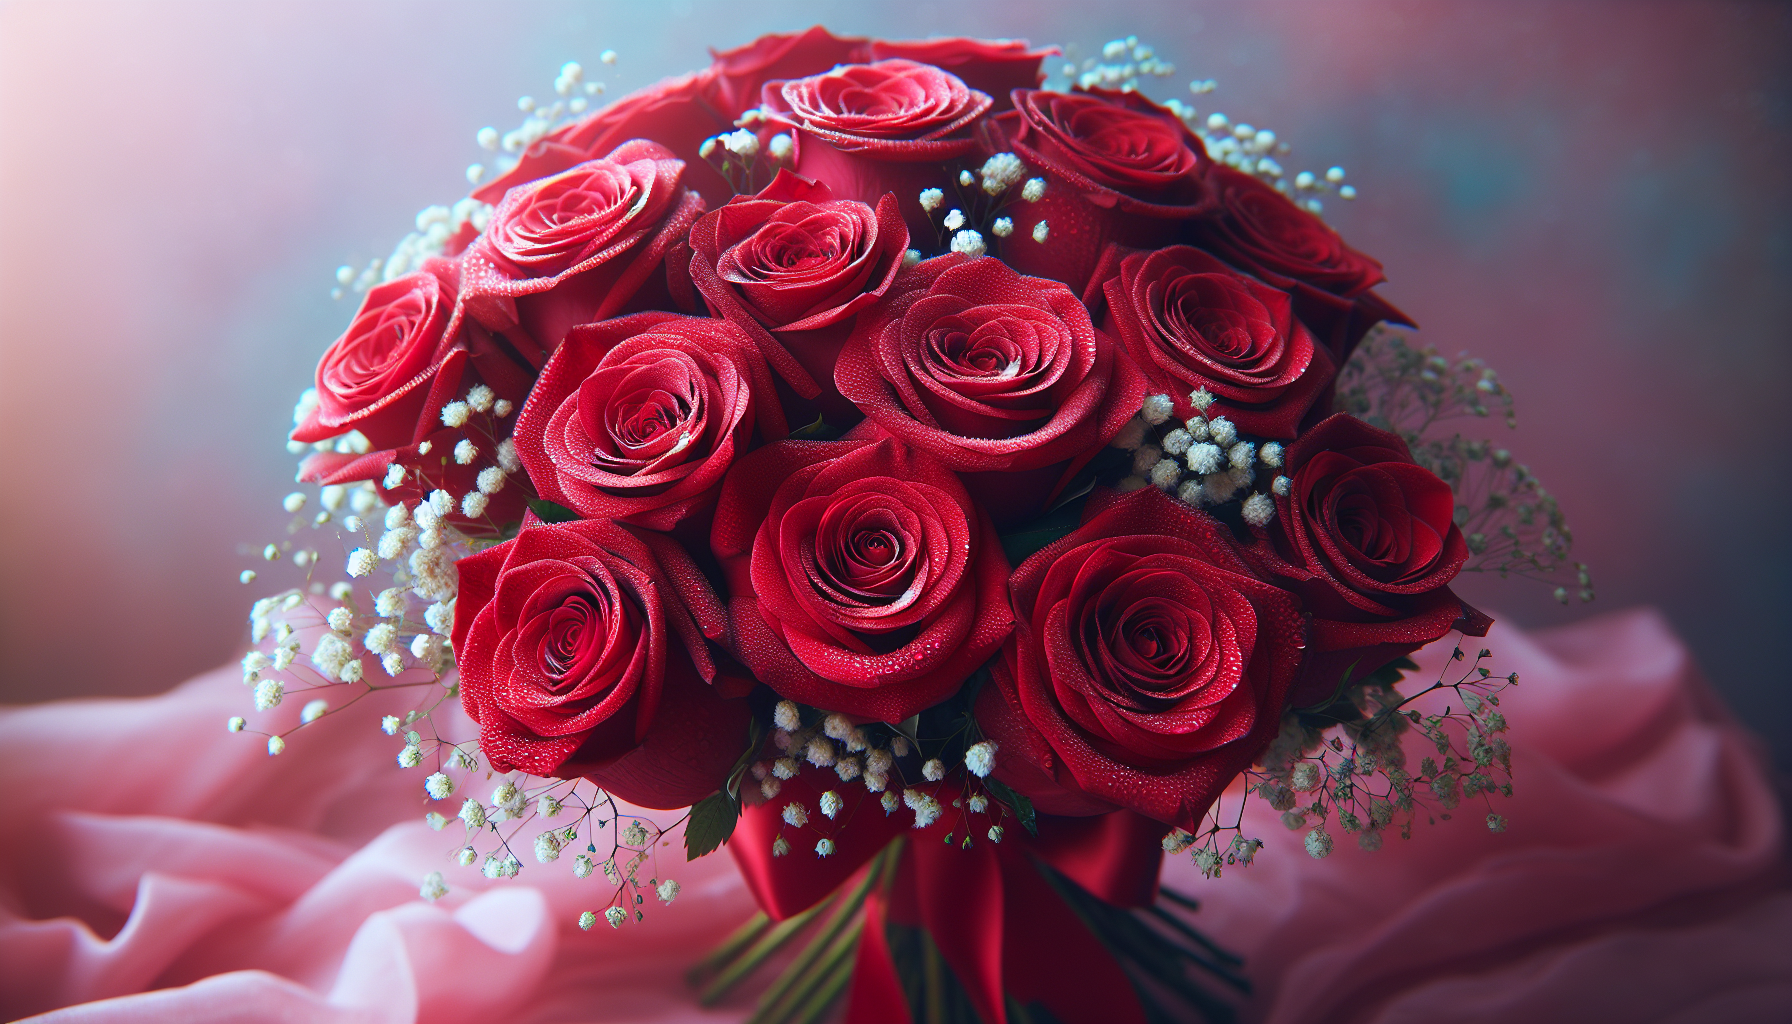 Exquisite bouquet of red roses for Valentine's Day